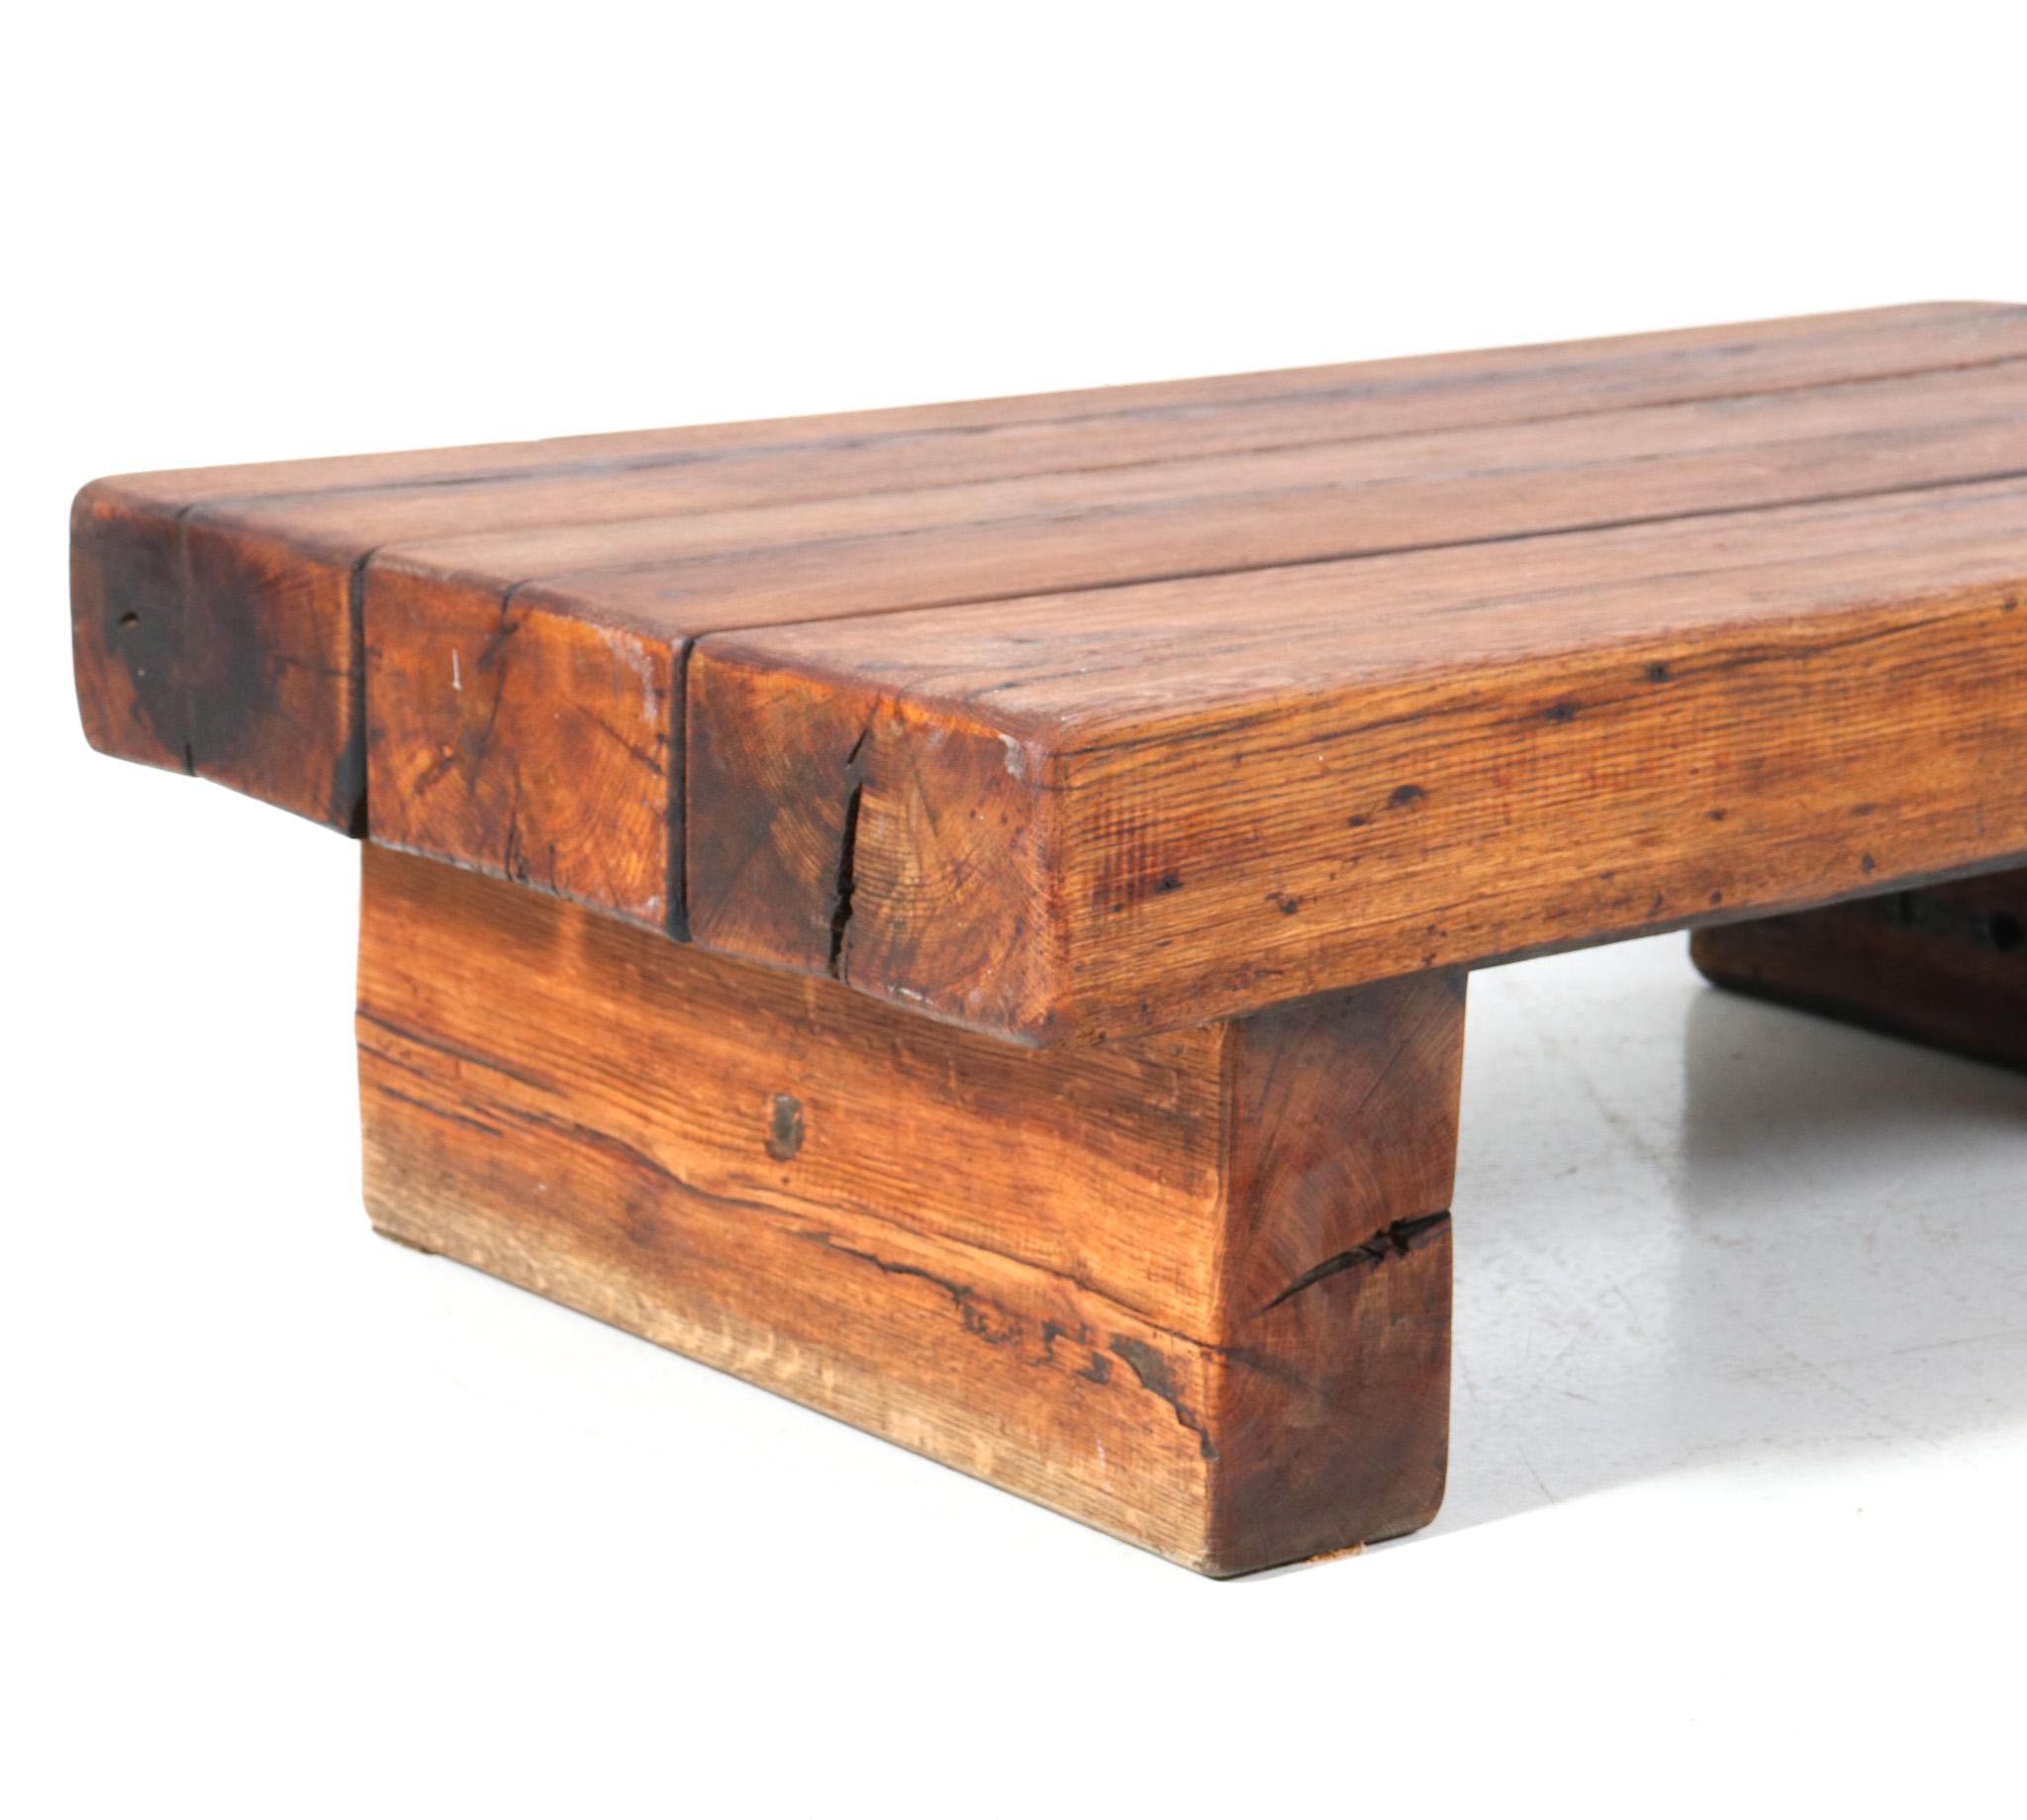 Oak Brutalist Rustic Coffee Table or Cocktail Table, 1960s For Sale 1